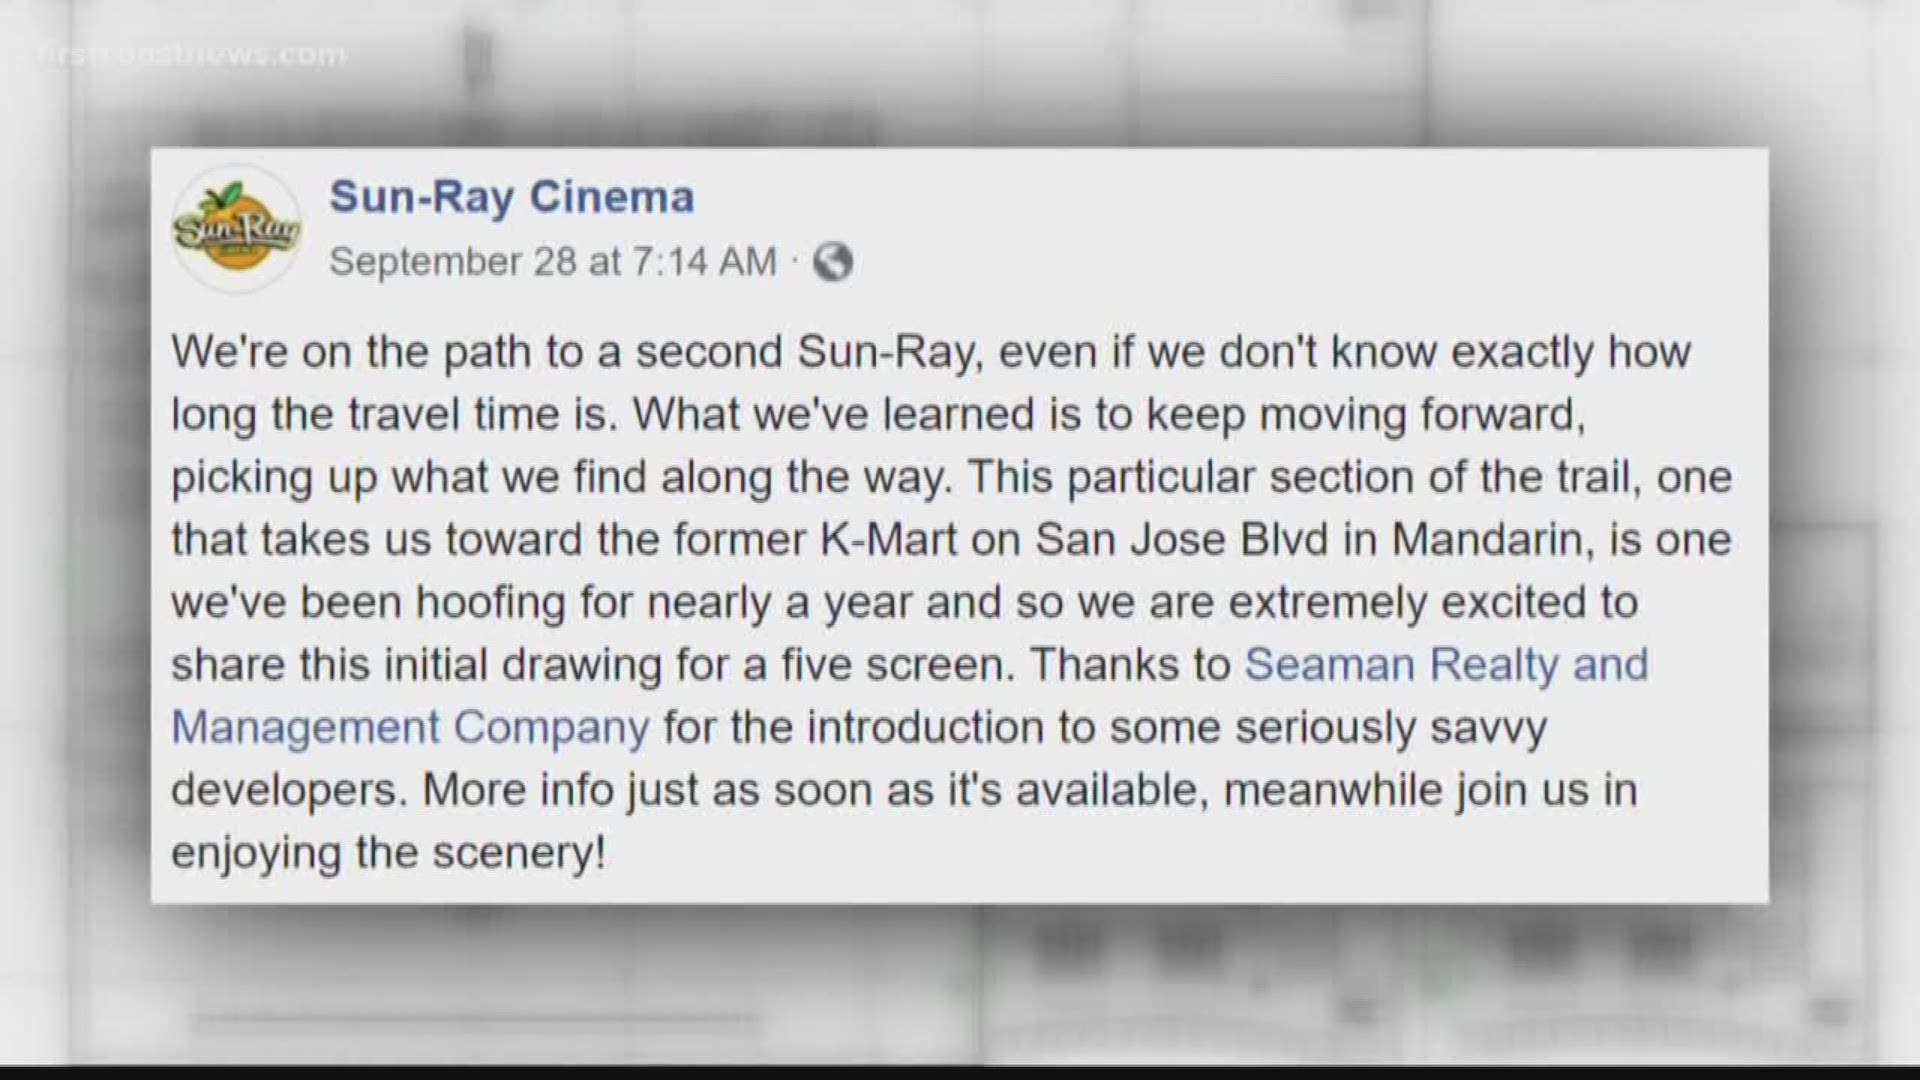 A former Kmart in Mandarin may become Jacksonville’s newest cinematic destination after Five Points movie theater Sun-Ray Cinema announced Saturday.